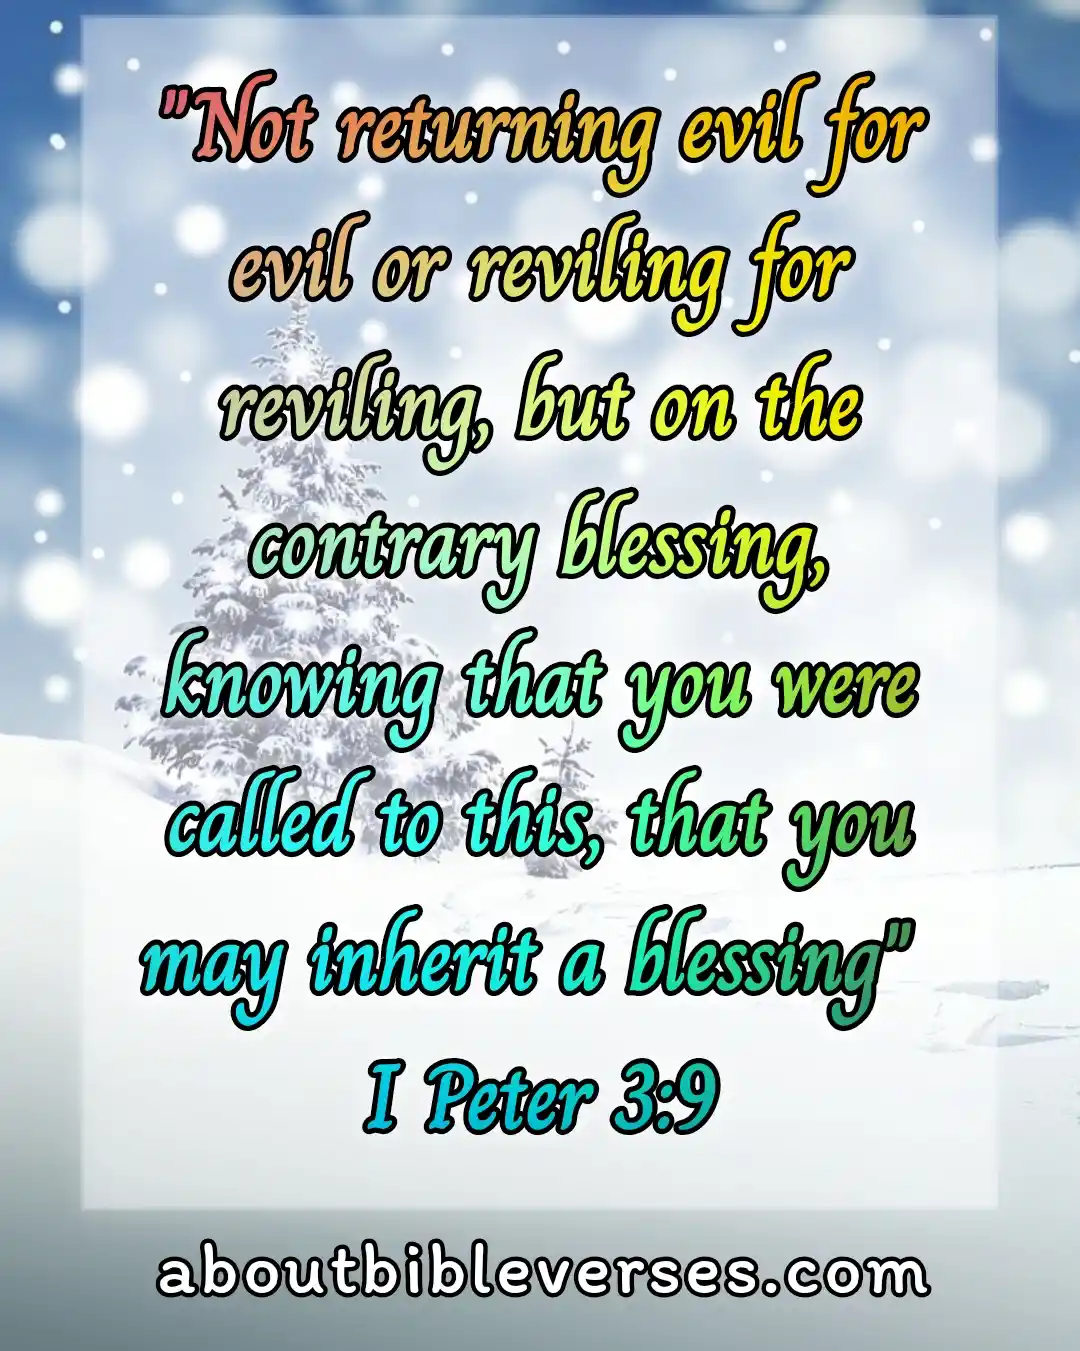 bible verses positive thinking (1 Peter 3:9)